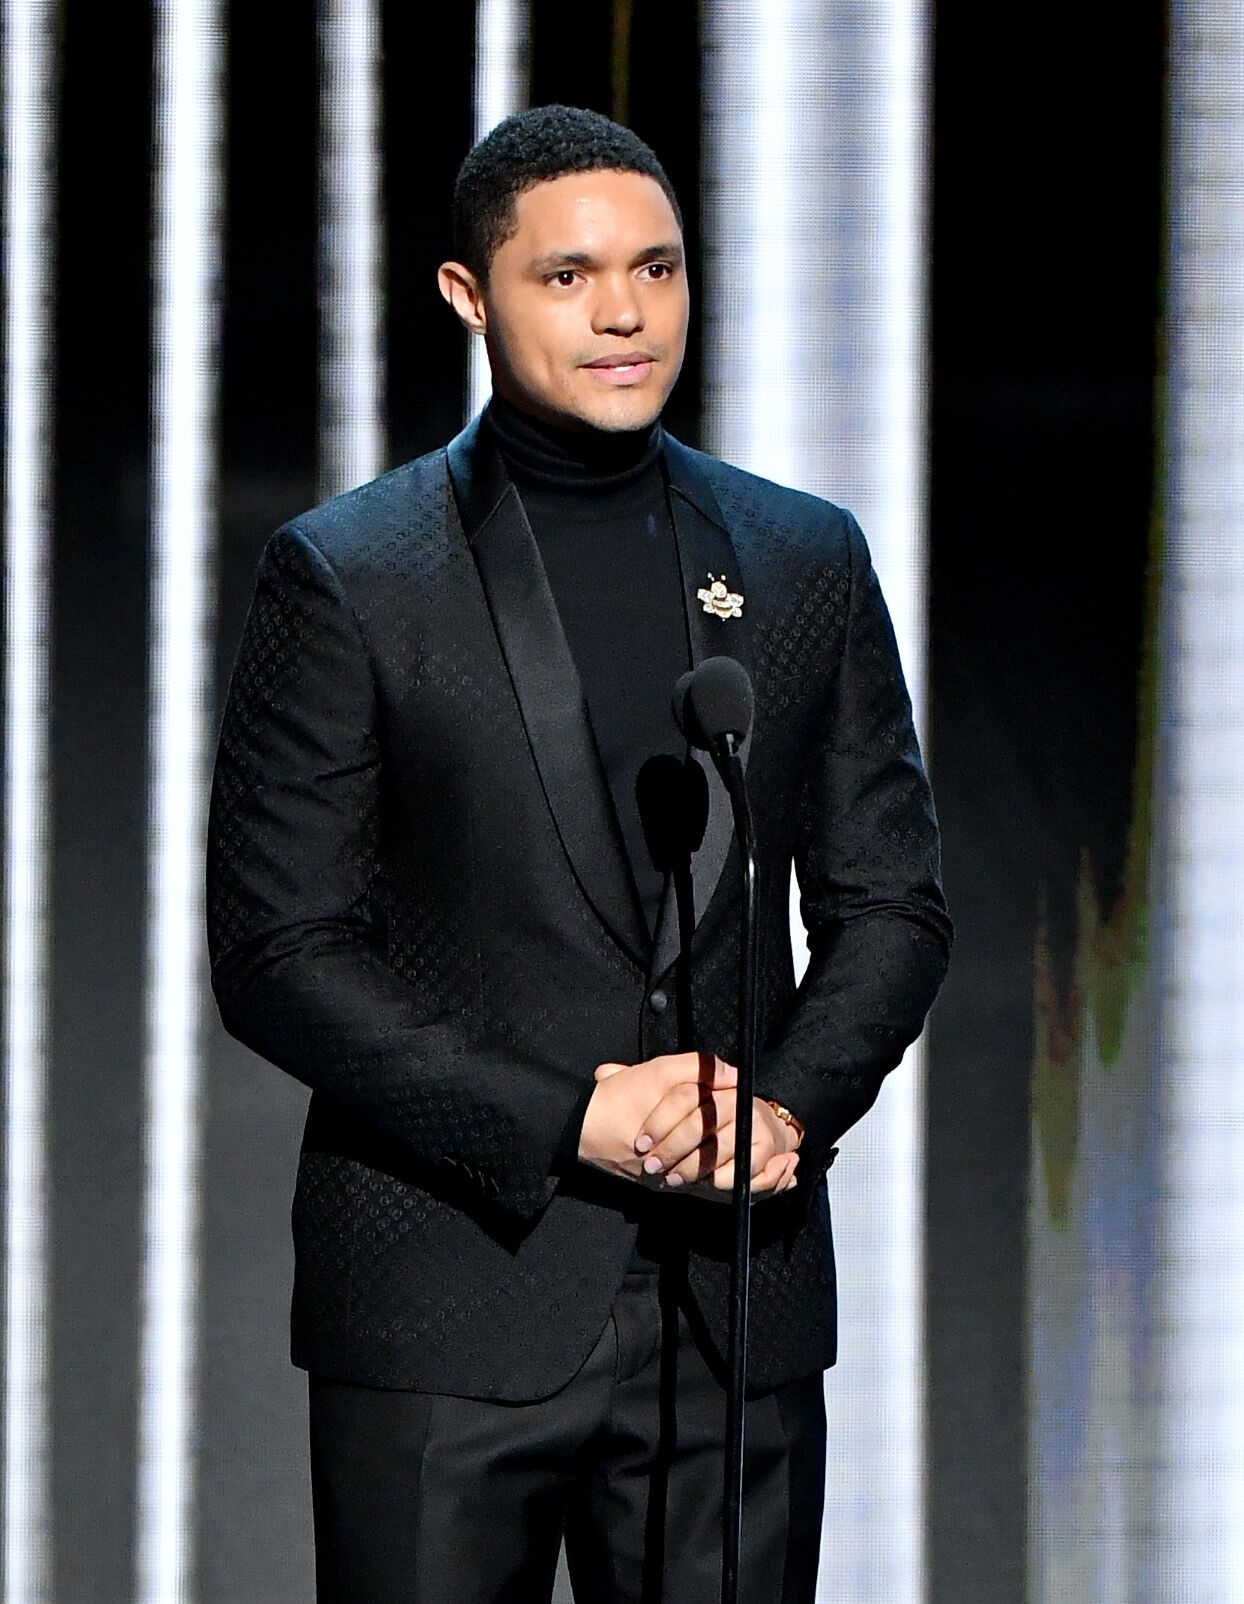 Trevor Noah speaks onstage at the 50th NAACP Image Awards at Dolby Theatre on March 30, 2019 in Hollywood, California. | Source: Getty Images